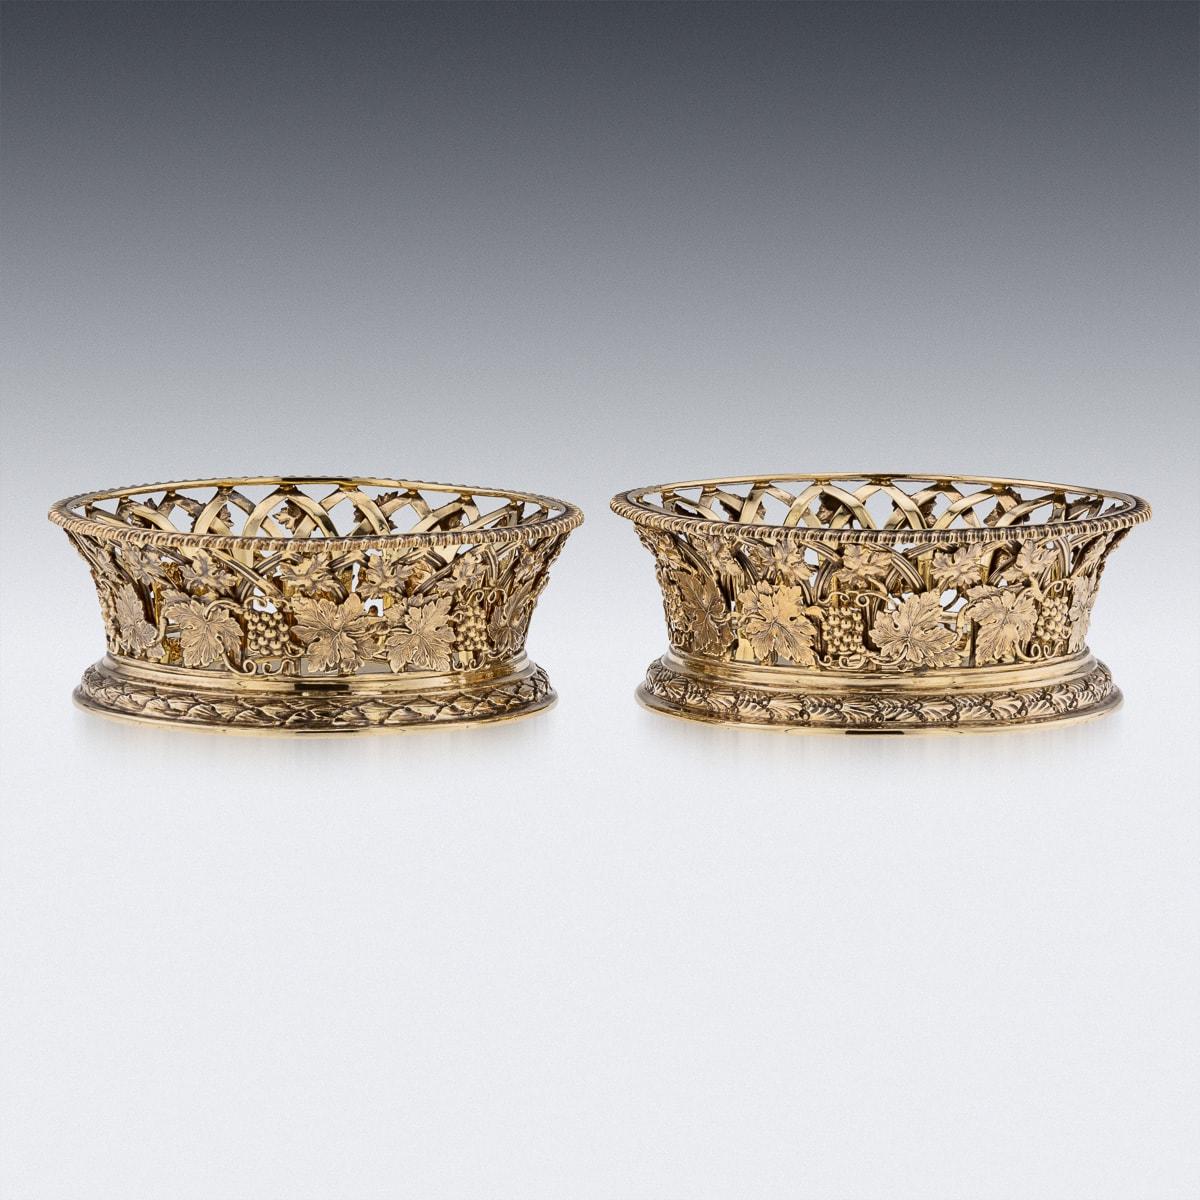 Antique 20th Century Edwardian Silver Gilt Pair Of Wine Coasters, London c.1904 For Sale 1